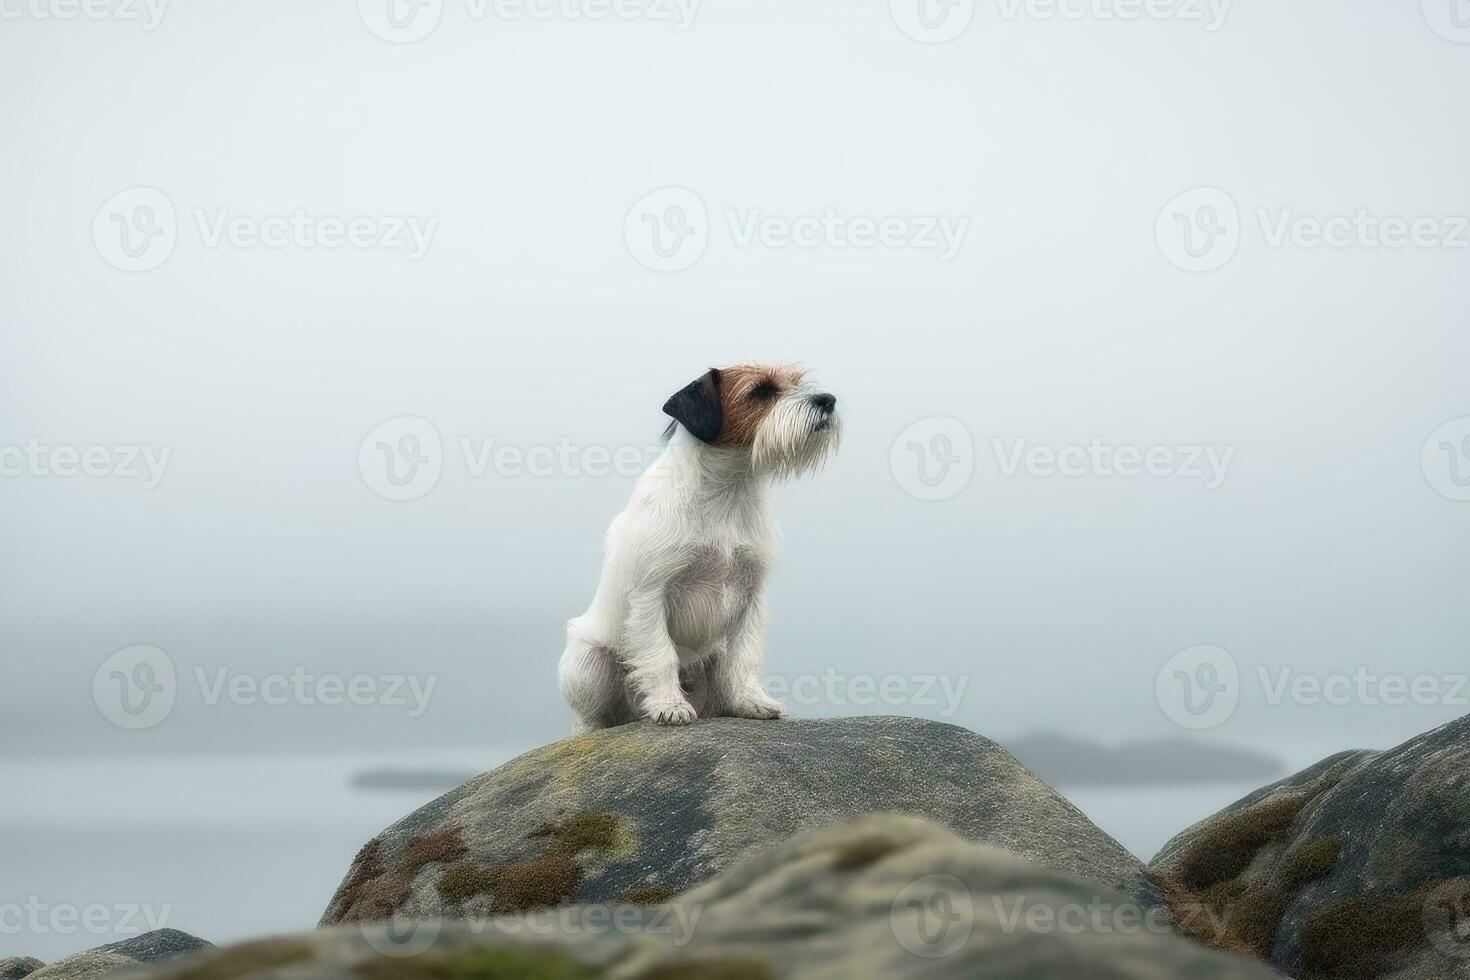 Crunchie the Jack Russell Terrier - Dogs On Camera